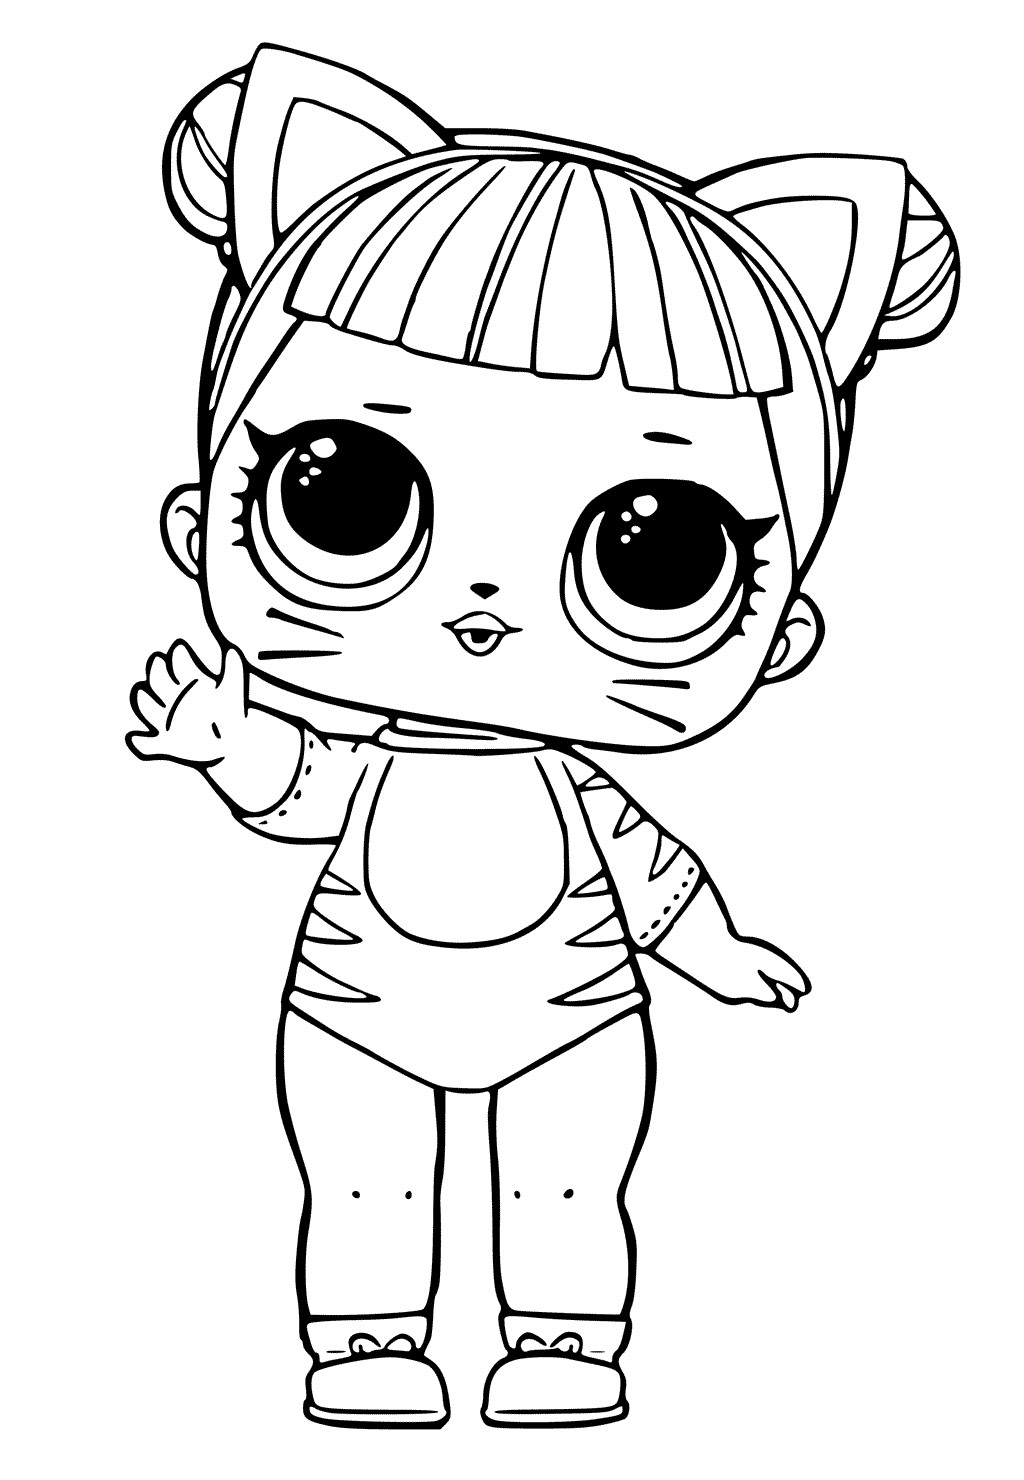 Coloring Pages For Kids Lol Dolls
 40 Free Printable LOL Surprise Dolls Coloring Pages